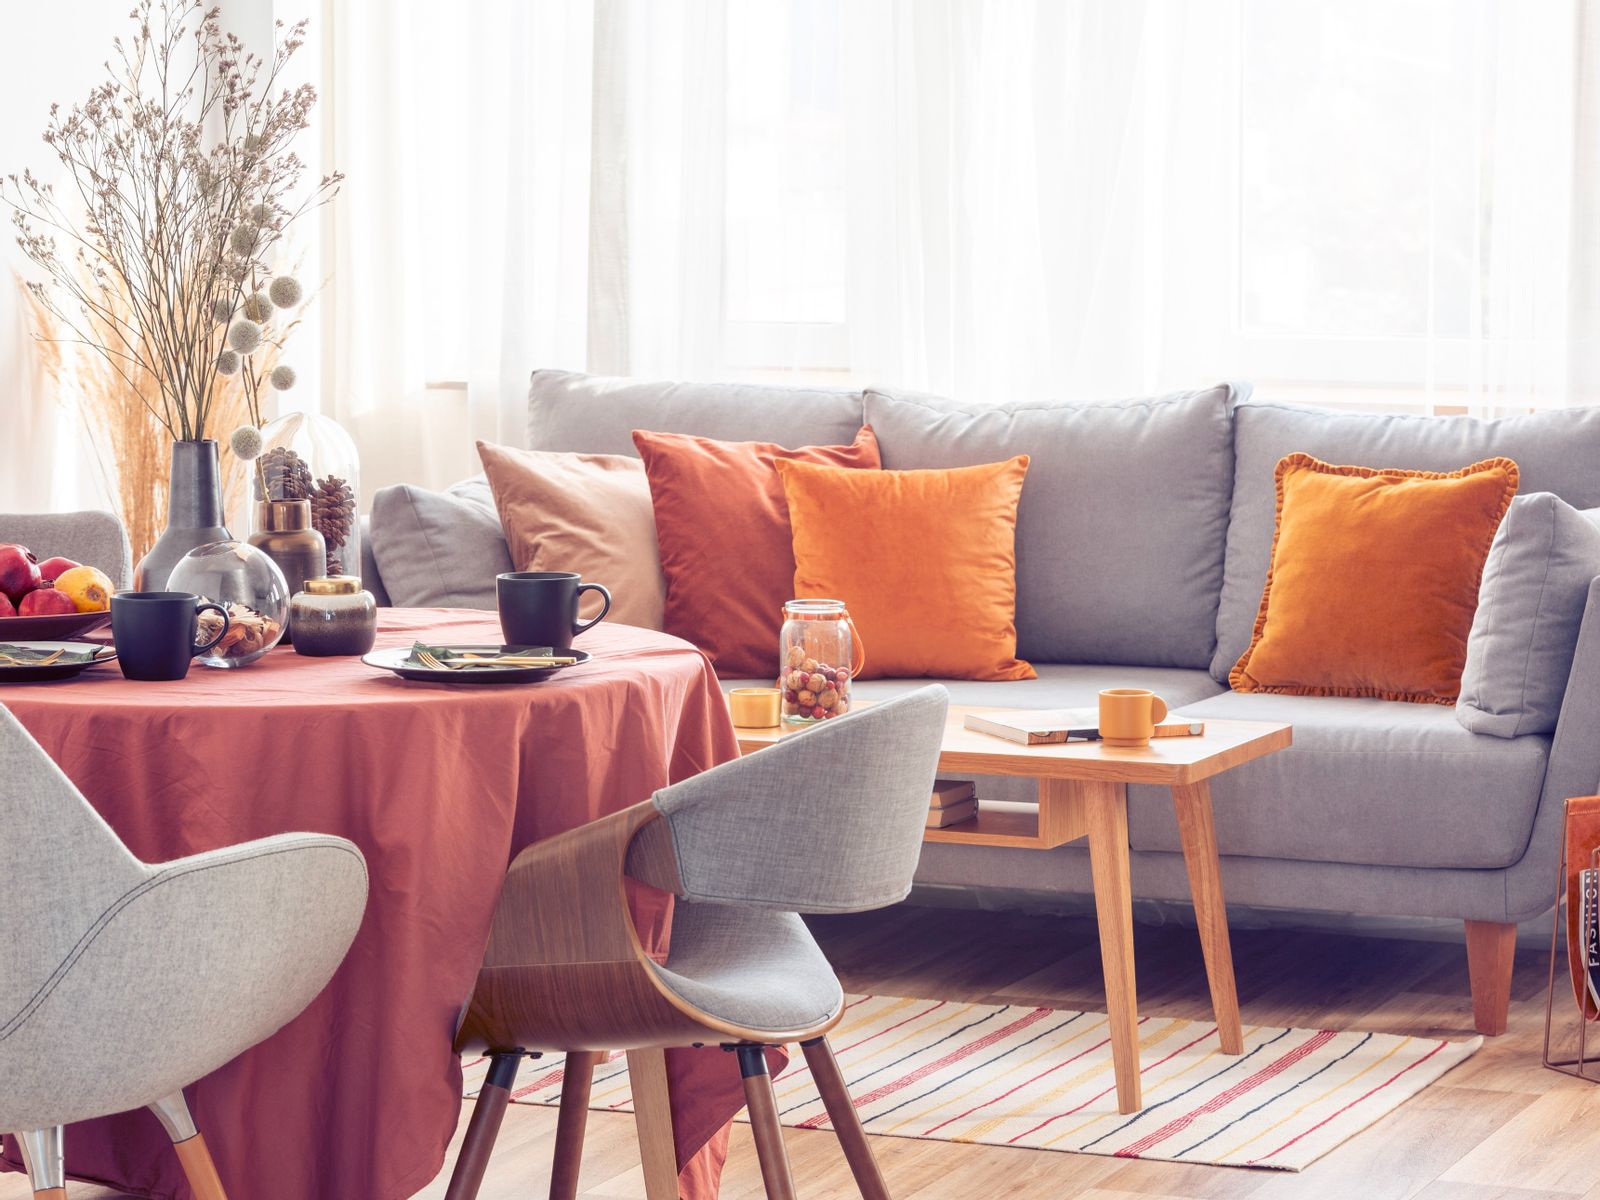 Four home decor trends for fall that are more than just pumpkins